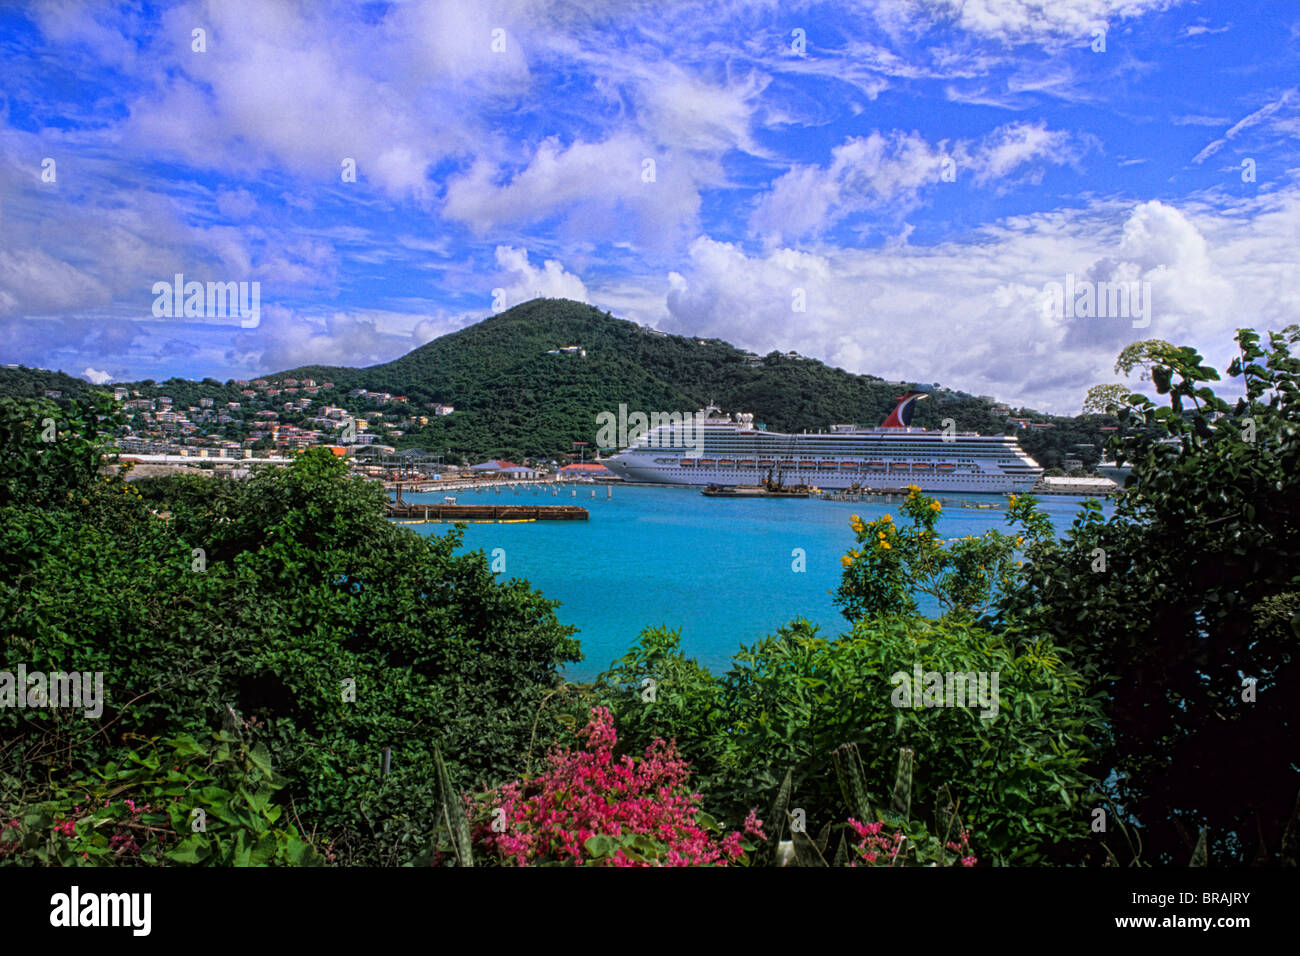 St Thomas in capital of Charlotte Amalie view from mountain showing ocean bay and Carnival Cruise Liberty at port Stock Photo